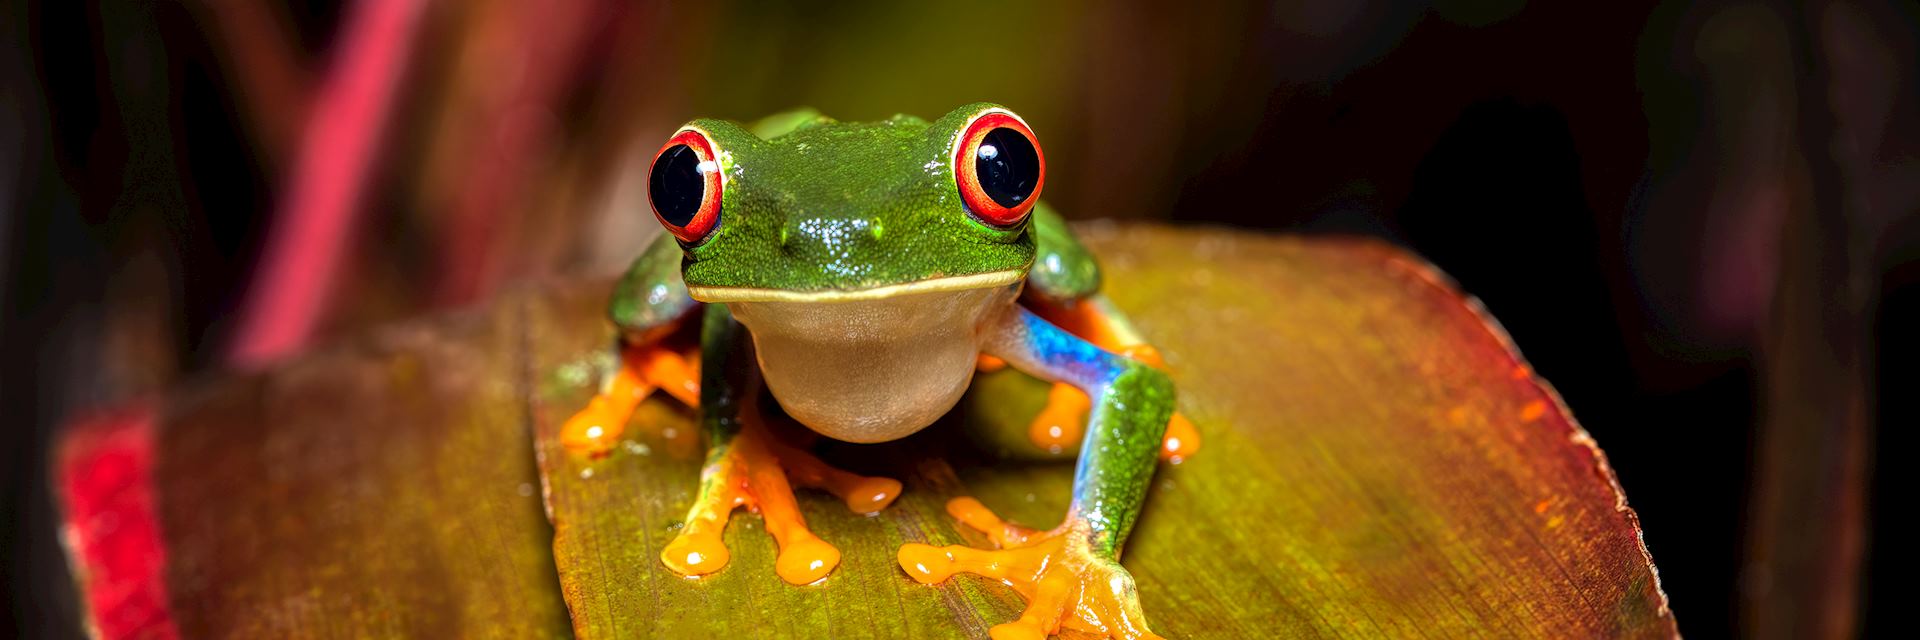 Red-eyed tree frog, Caño Negro Wildlife Reserve, Costa Rica